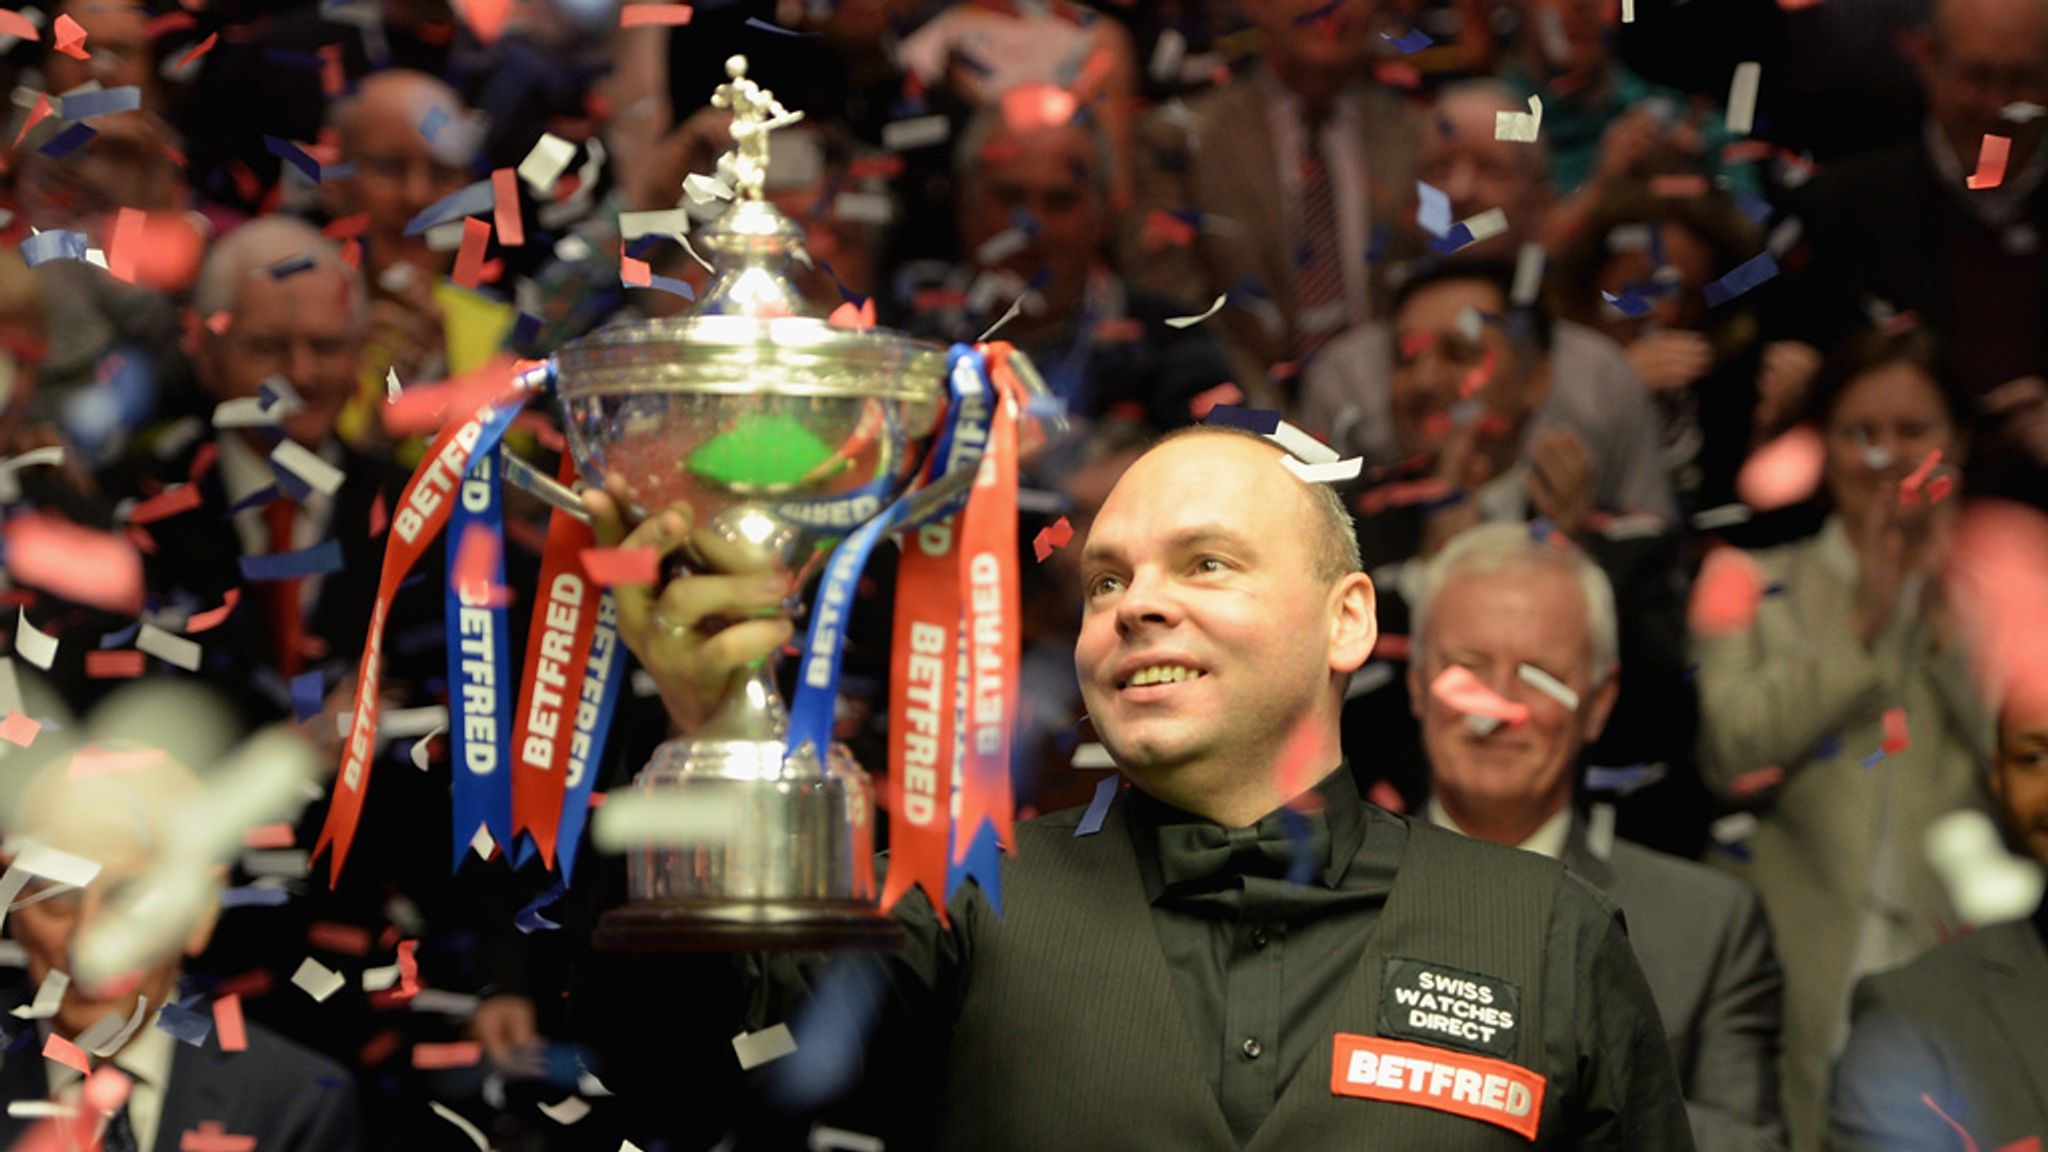 Stuart Bingham concerned modern fans have lost touch with snooker history Snooker News Sky Sports